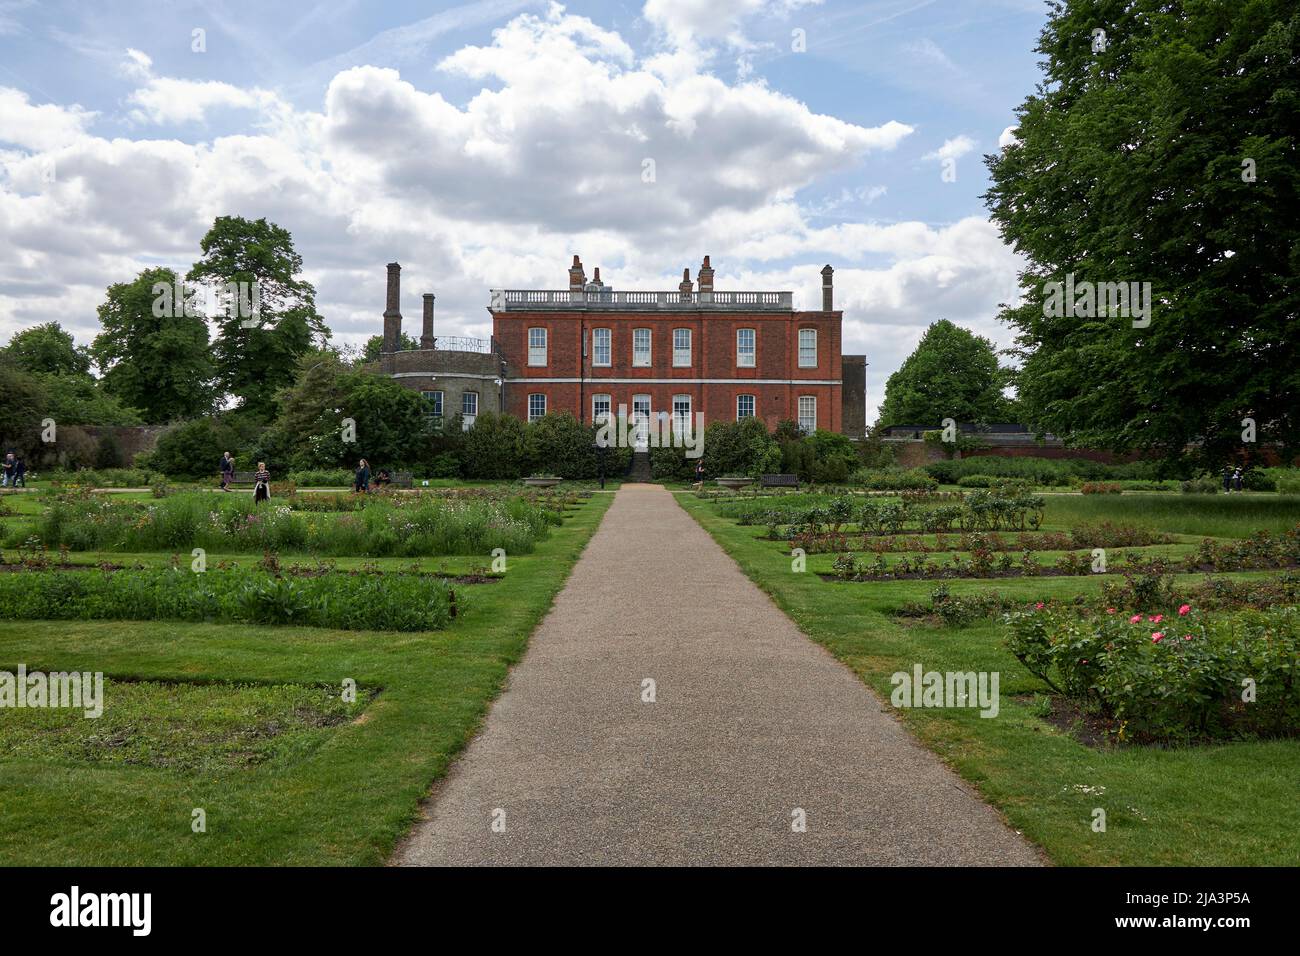 The Rangers's House, Greenwich Park, London, used as the main residence in Netflix's hit series Bridgerton. Stock Photo